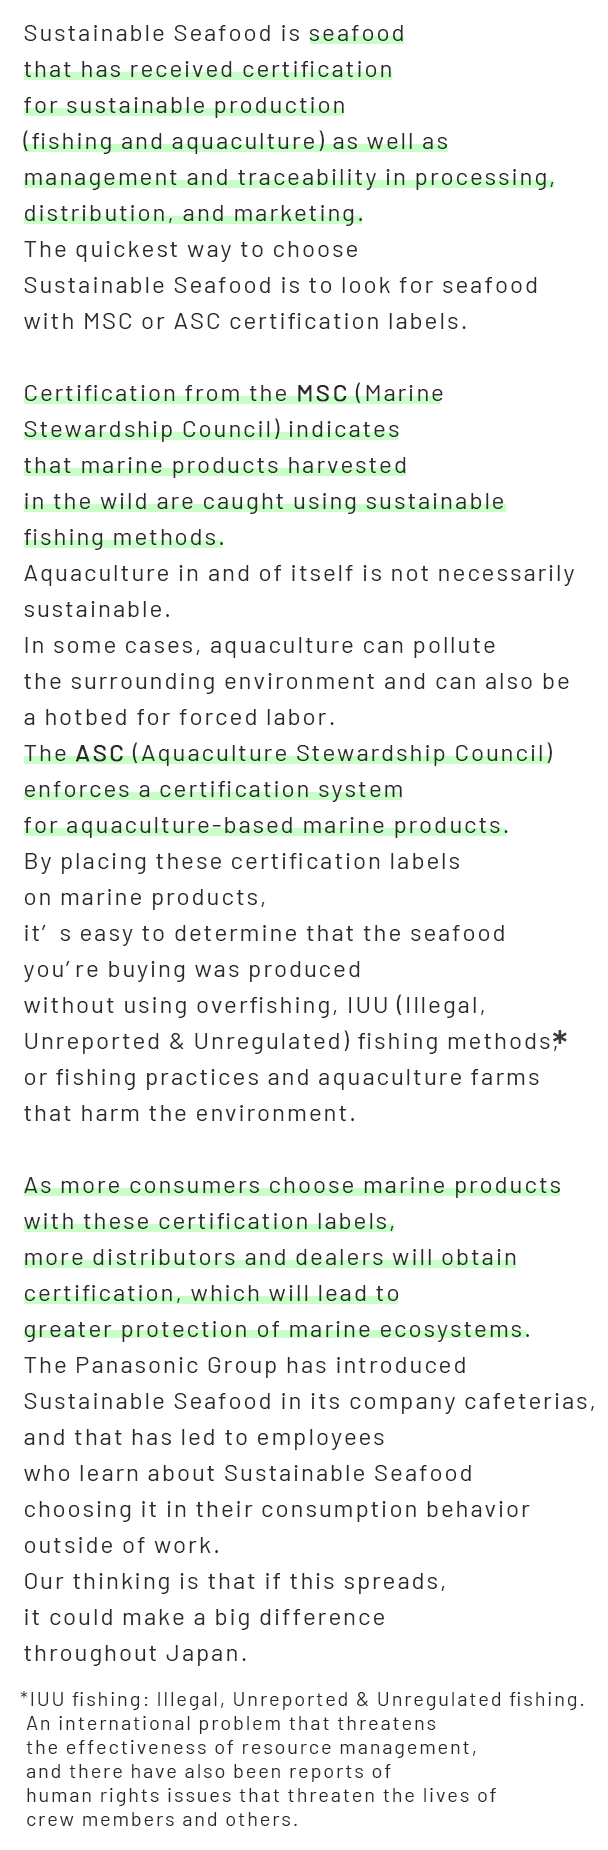 Sustainable Seafood is seafood that has received certification for sustainable production  (fishing and aquaculture) as well as management and traceability in processing, distribution,  and marketing. The quickest way to choose Sustainable Seafood is to look for seafood  with MSC or ASC certification labels.  Certification from the MSC (Marine Stewardship Council) indicates  that marine products harvested in the wild are caught using sustainable fishing methods. Aquaculture in and of itself is not necessarily sustainable.  In some cases, aquaculture can pollute the surrounding environment and can also be  a hotbed for forced labor. The ASC (Aquaculture Stewardship Council) enforces  a certification system for aquaculture-based marine products. By placing these certification labels on marine products,  it’s easy to determine that the seafood you’re buying was produced  without using overfishing, IUU (Illegal, Unreported & Unregulated) fishing methods,  or fishing  practices and aquaculture farms that harm the environment.  As more consumers choose marine products with these certification labels,  more distributors and dealers will obtain certification, which will lead to greater protection  of marine ecosystems. The Panasonic Group has introduced Sustainable Seafood in its company cafeterias,  and that has led to employees who learn about Sustainable Seafood choosing  it in their consumption behavior outside of work. Our thinking is that if this spreads, it could make a big difference throughout Japan. *IUU fishing:   Illegal, Unreported & Unregulated fishing. An international problem  that threatens the effectiveness of resource management, and there have also been reports of  human rights issues that threaten the lives of crew members and others.